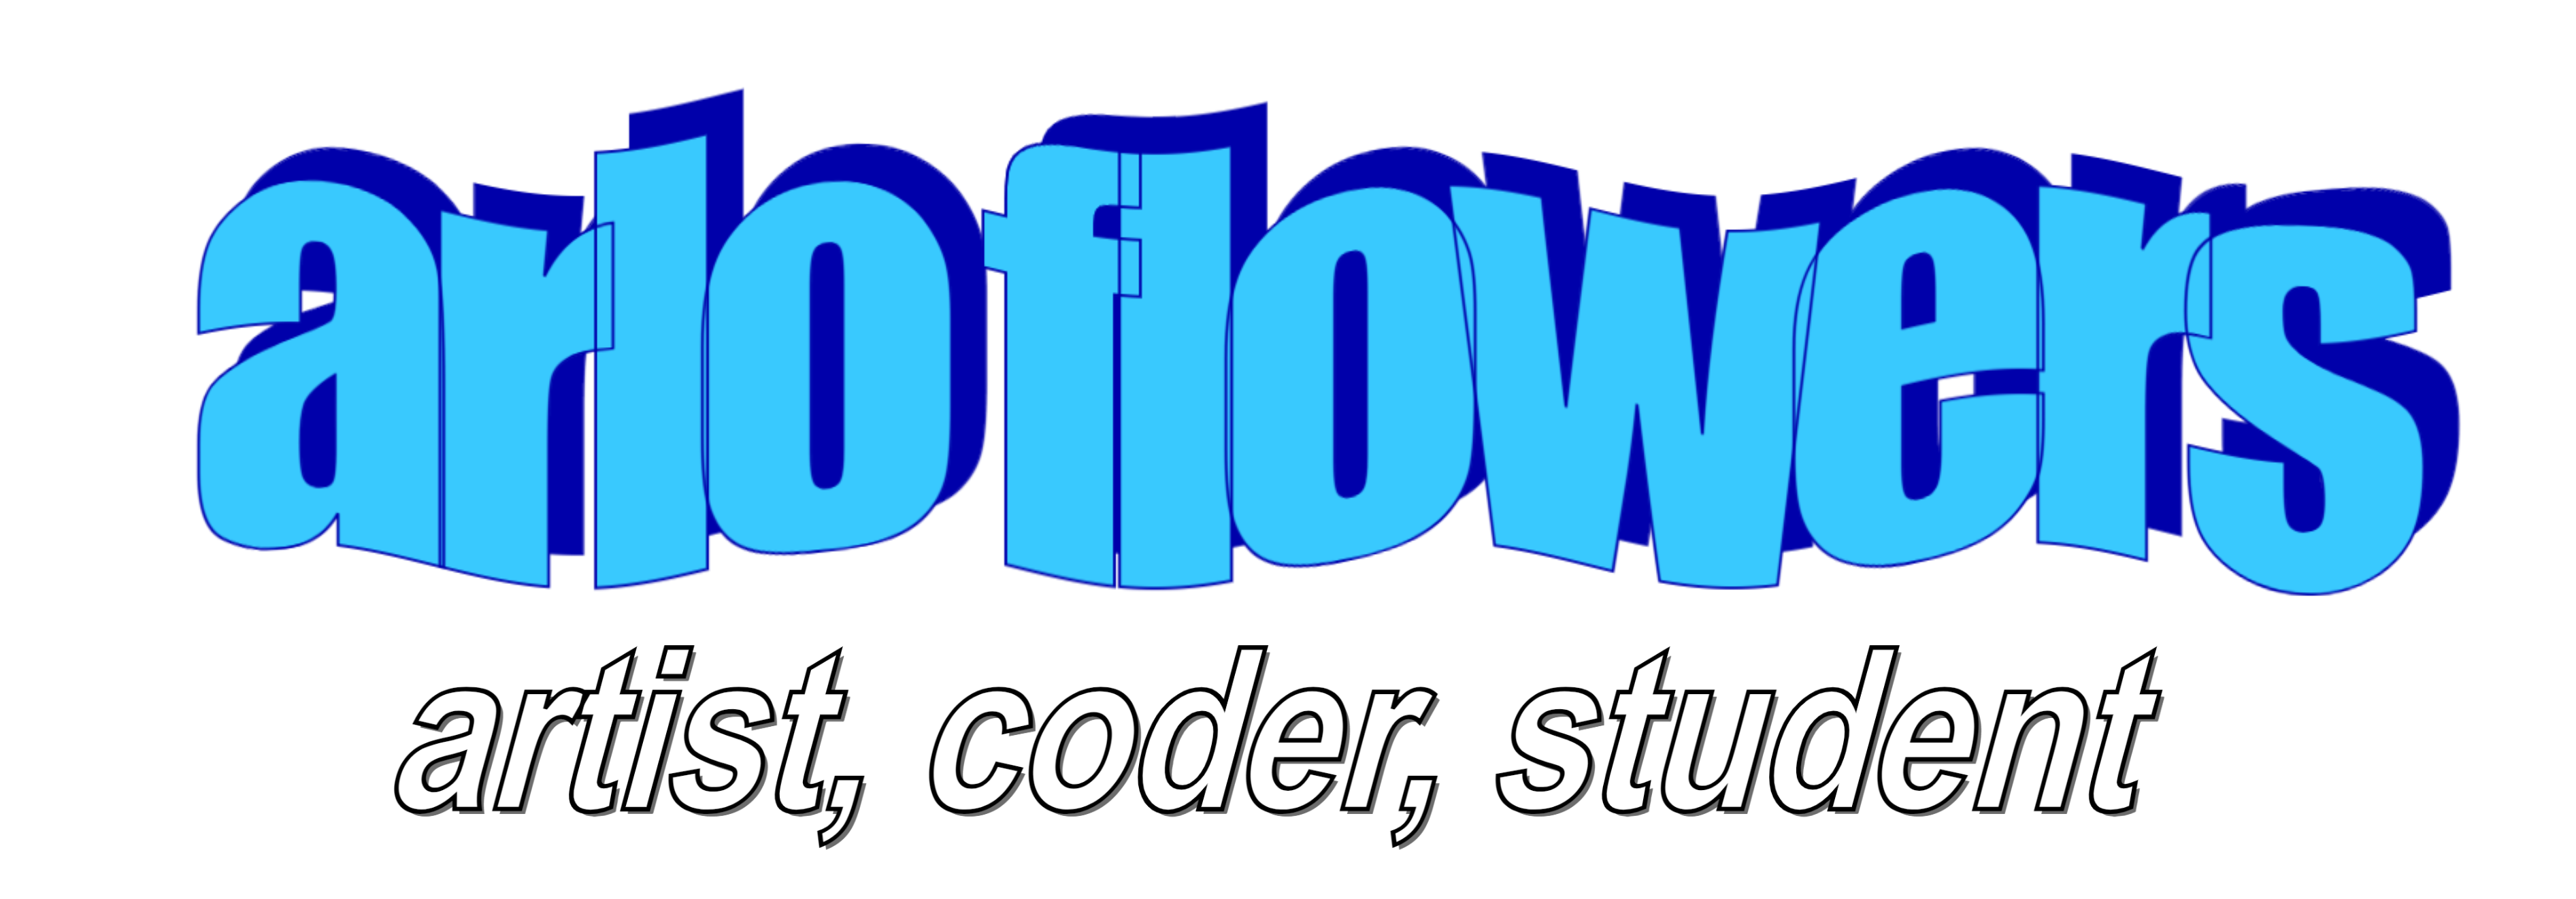 Blue word art with a dark blue shadow that says 'arlo flowers' in all lowercase wavy letters. Below this it says 'artist, coder, student' in white italics.